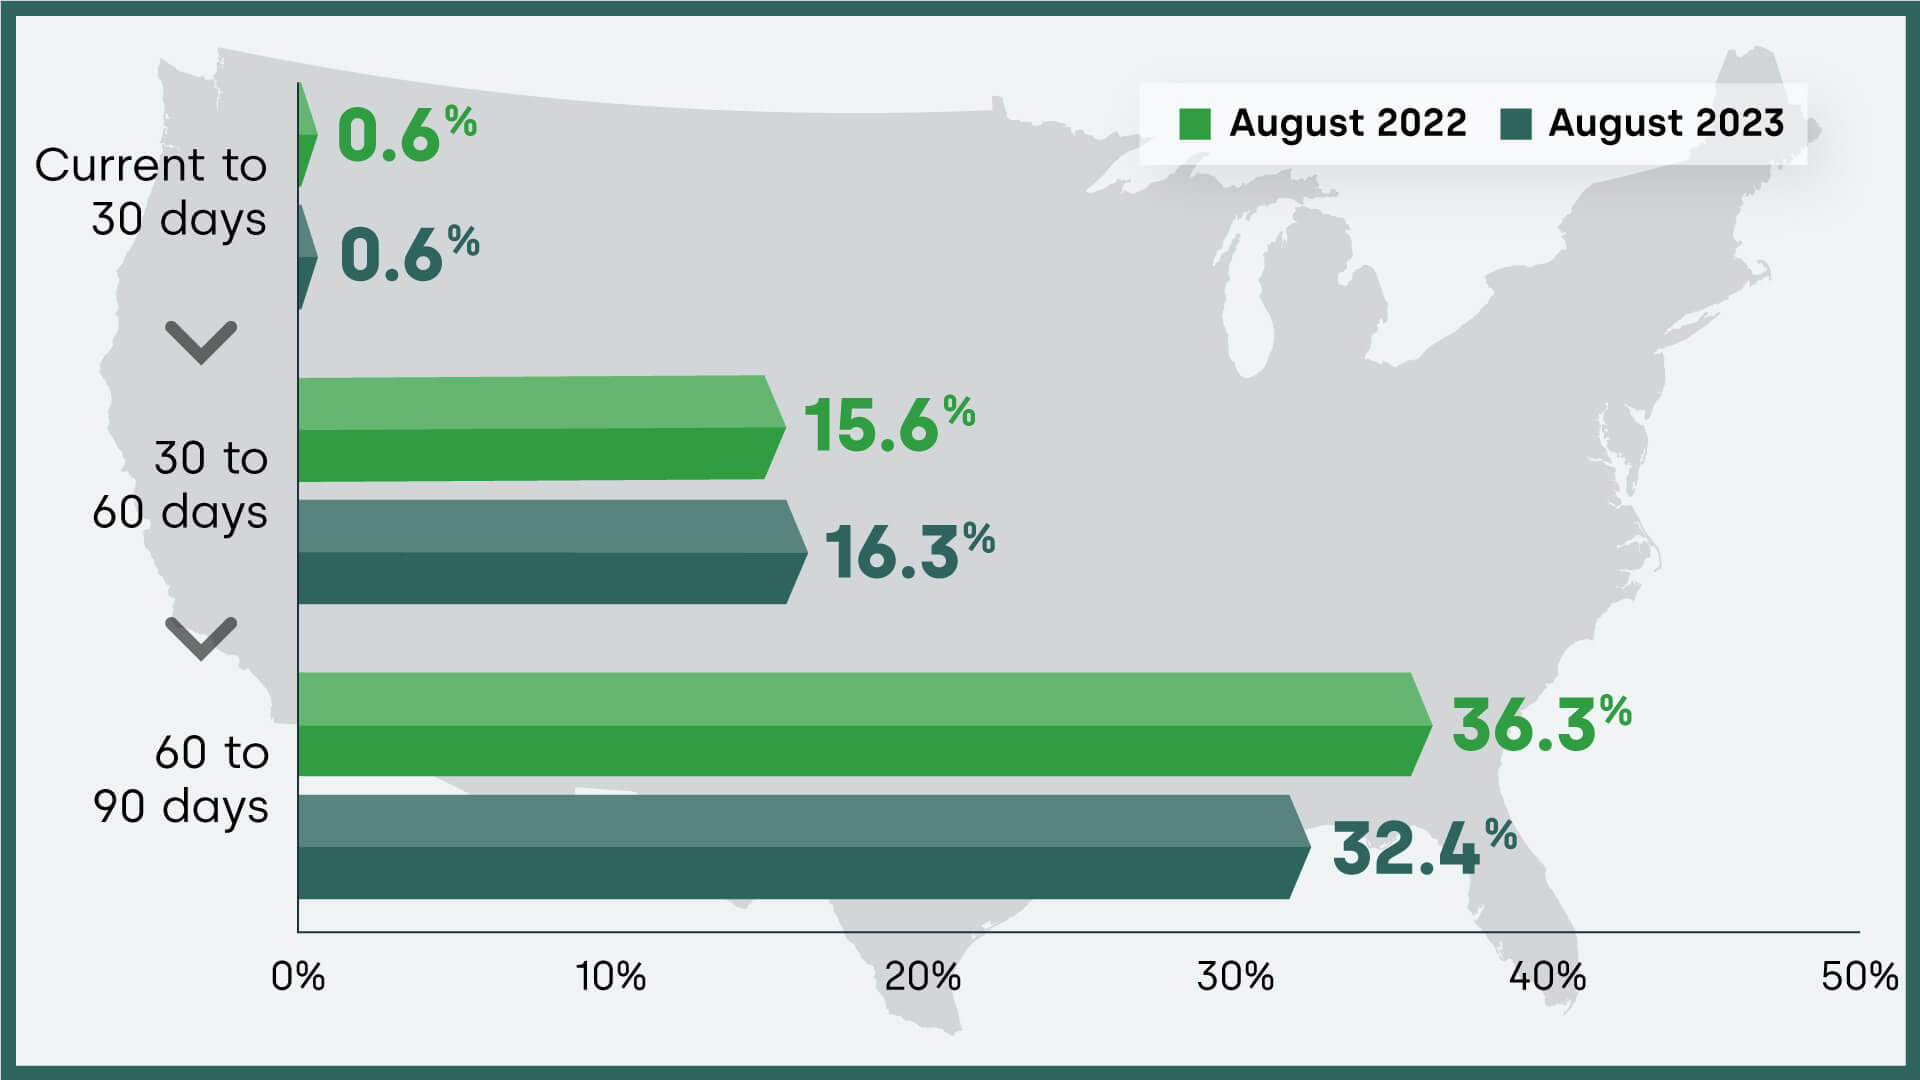 Share of delinquent mortgages transitioning from one stage to the next and year-over-year change, August 2023